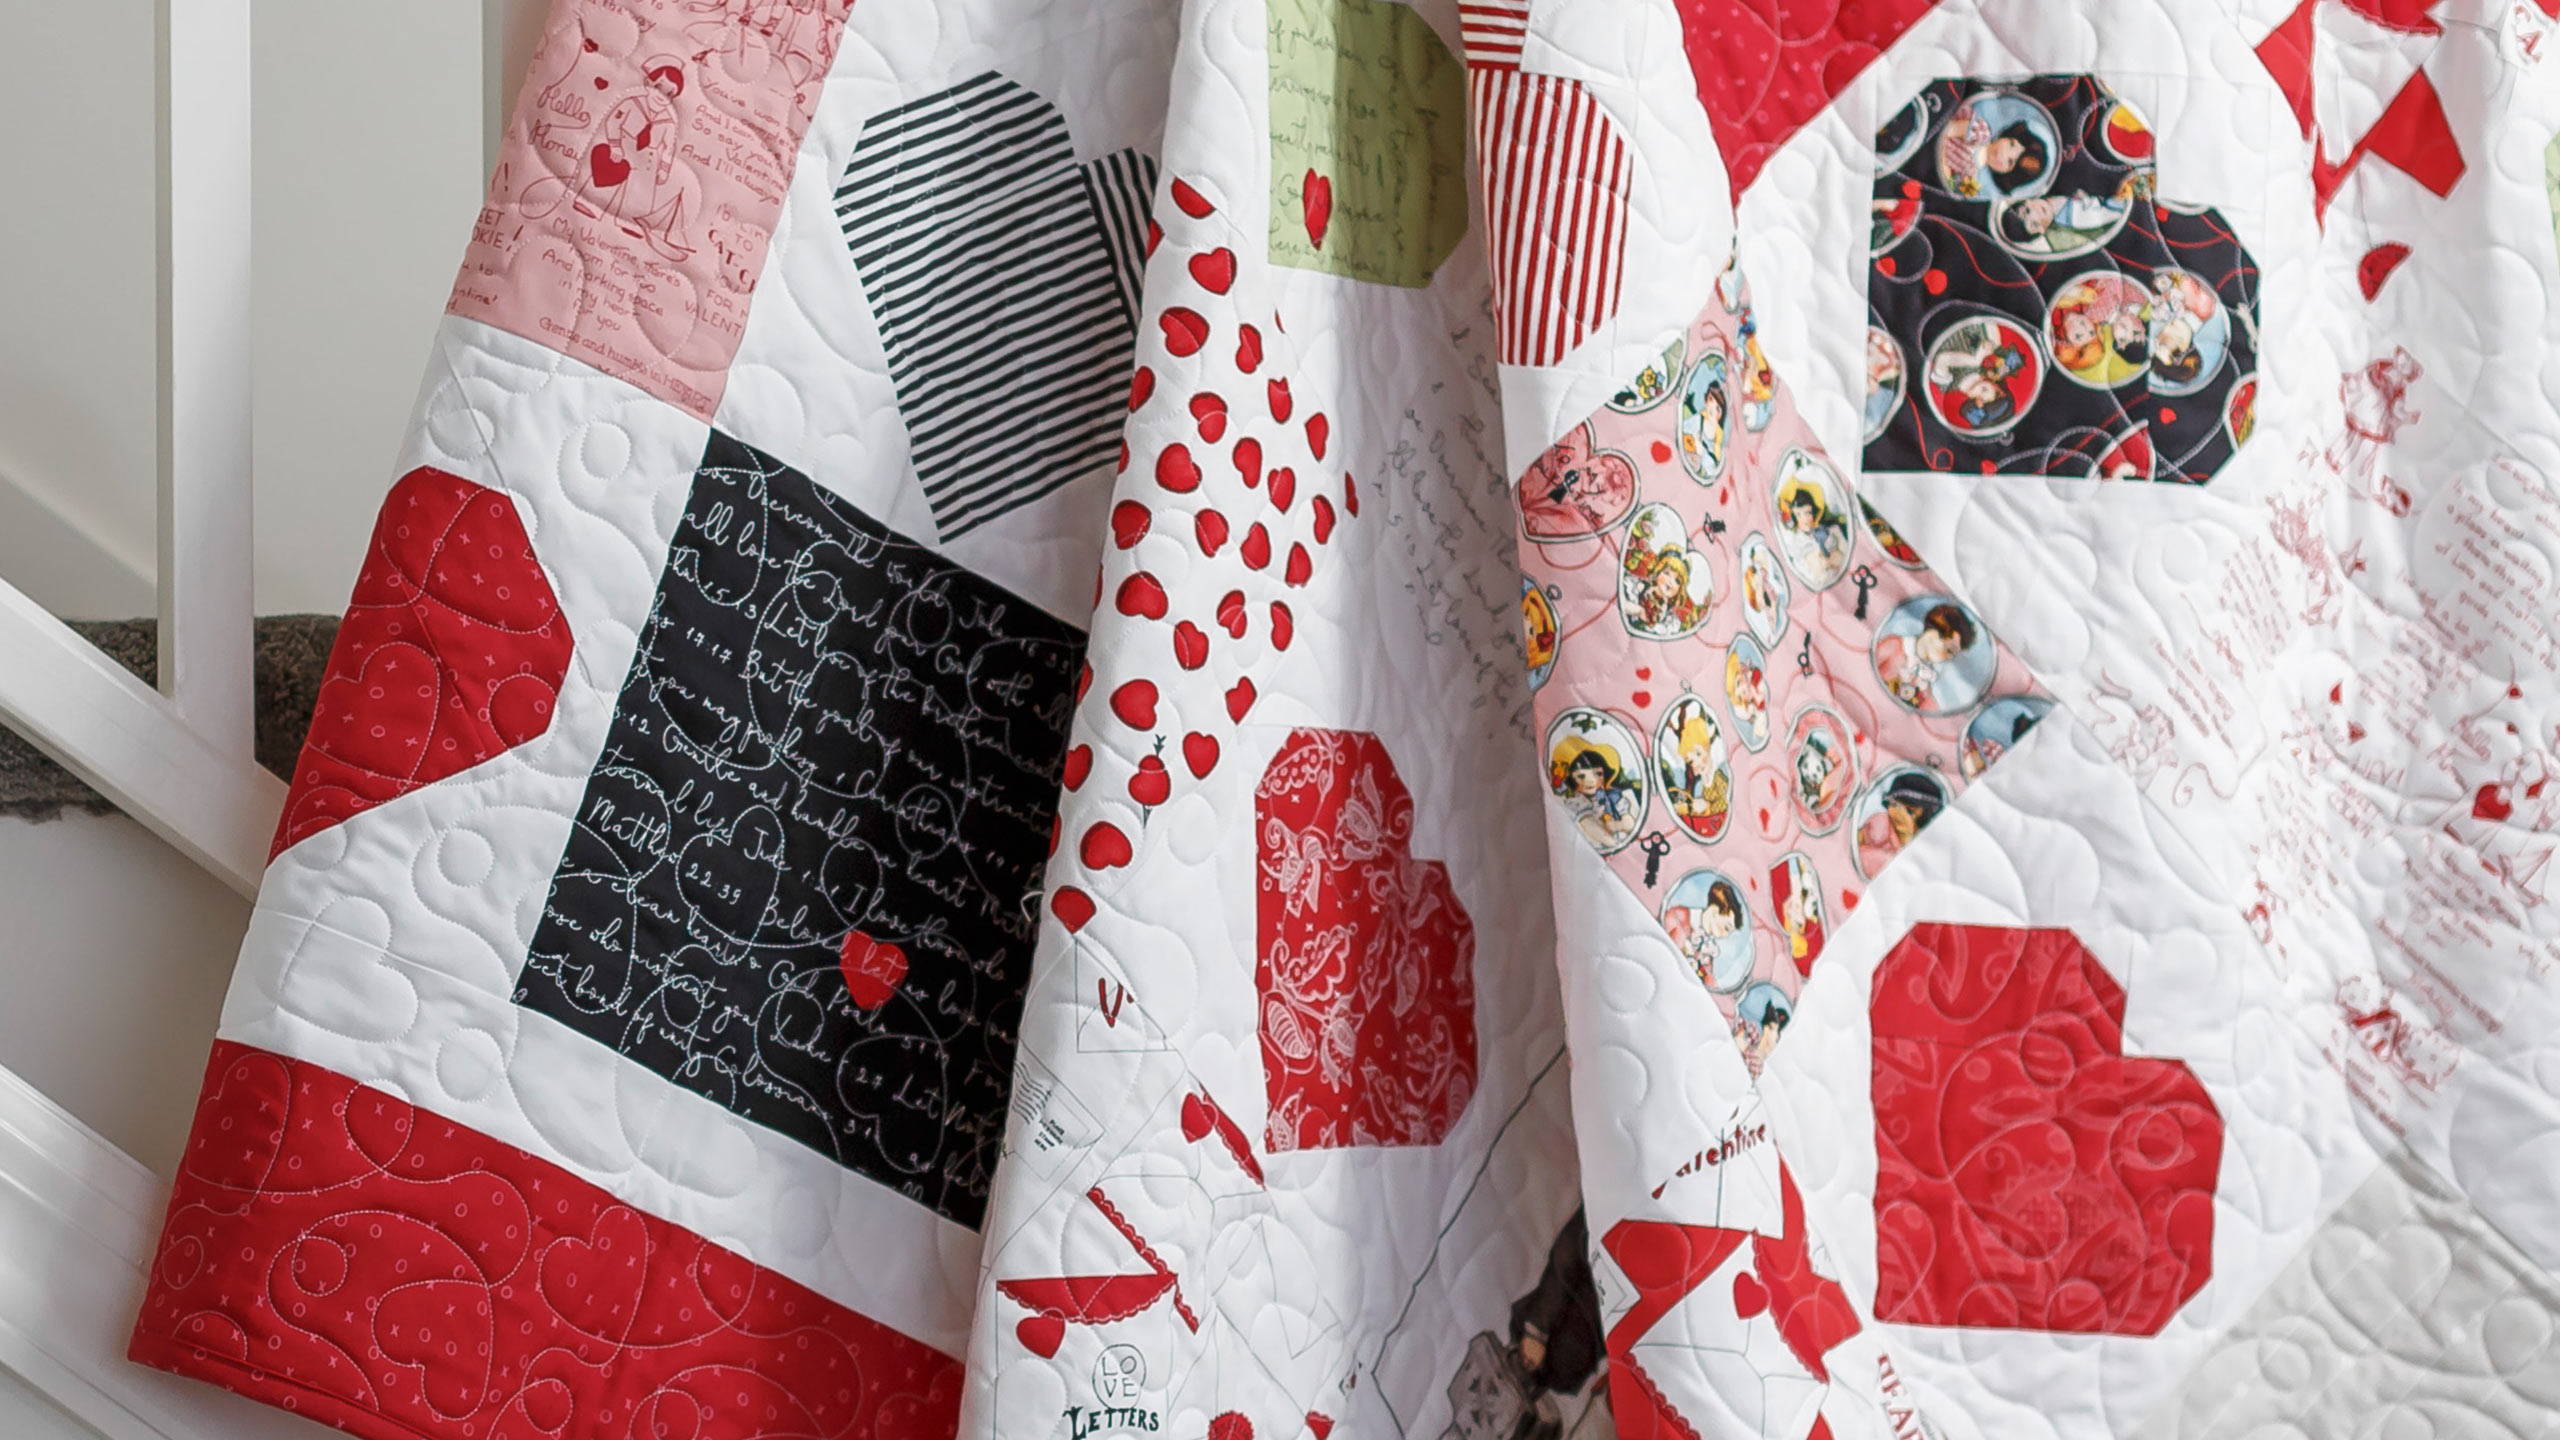 Vintage Hearts Quilt to Sew as a DIY Wedding Gift